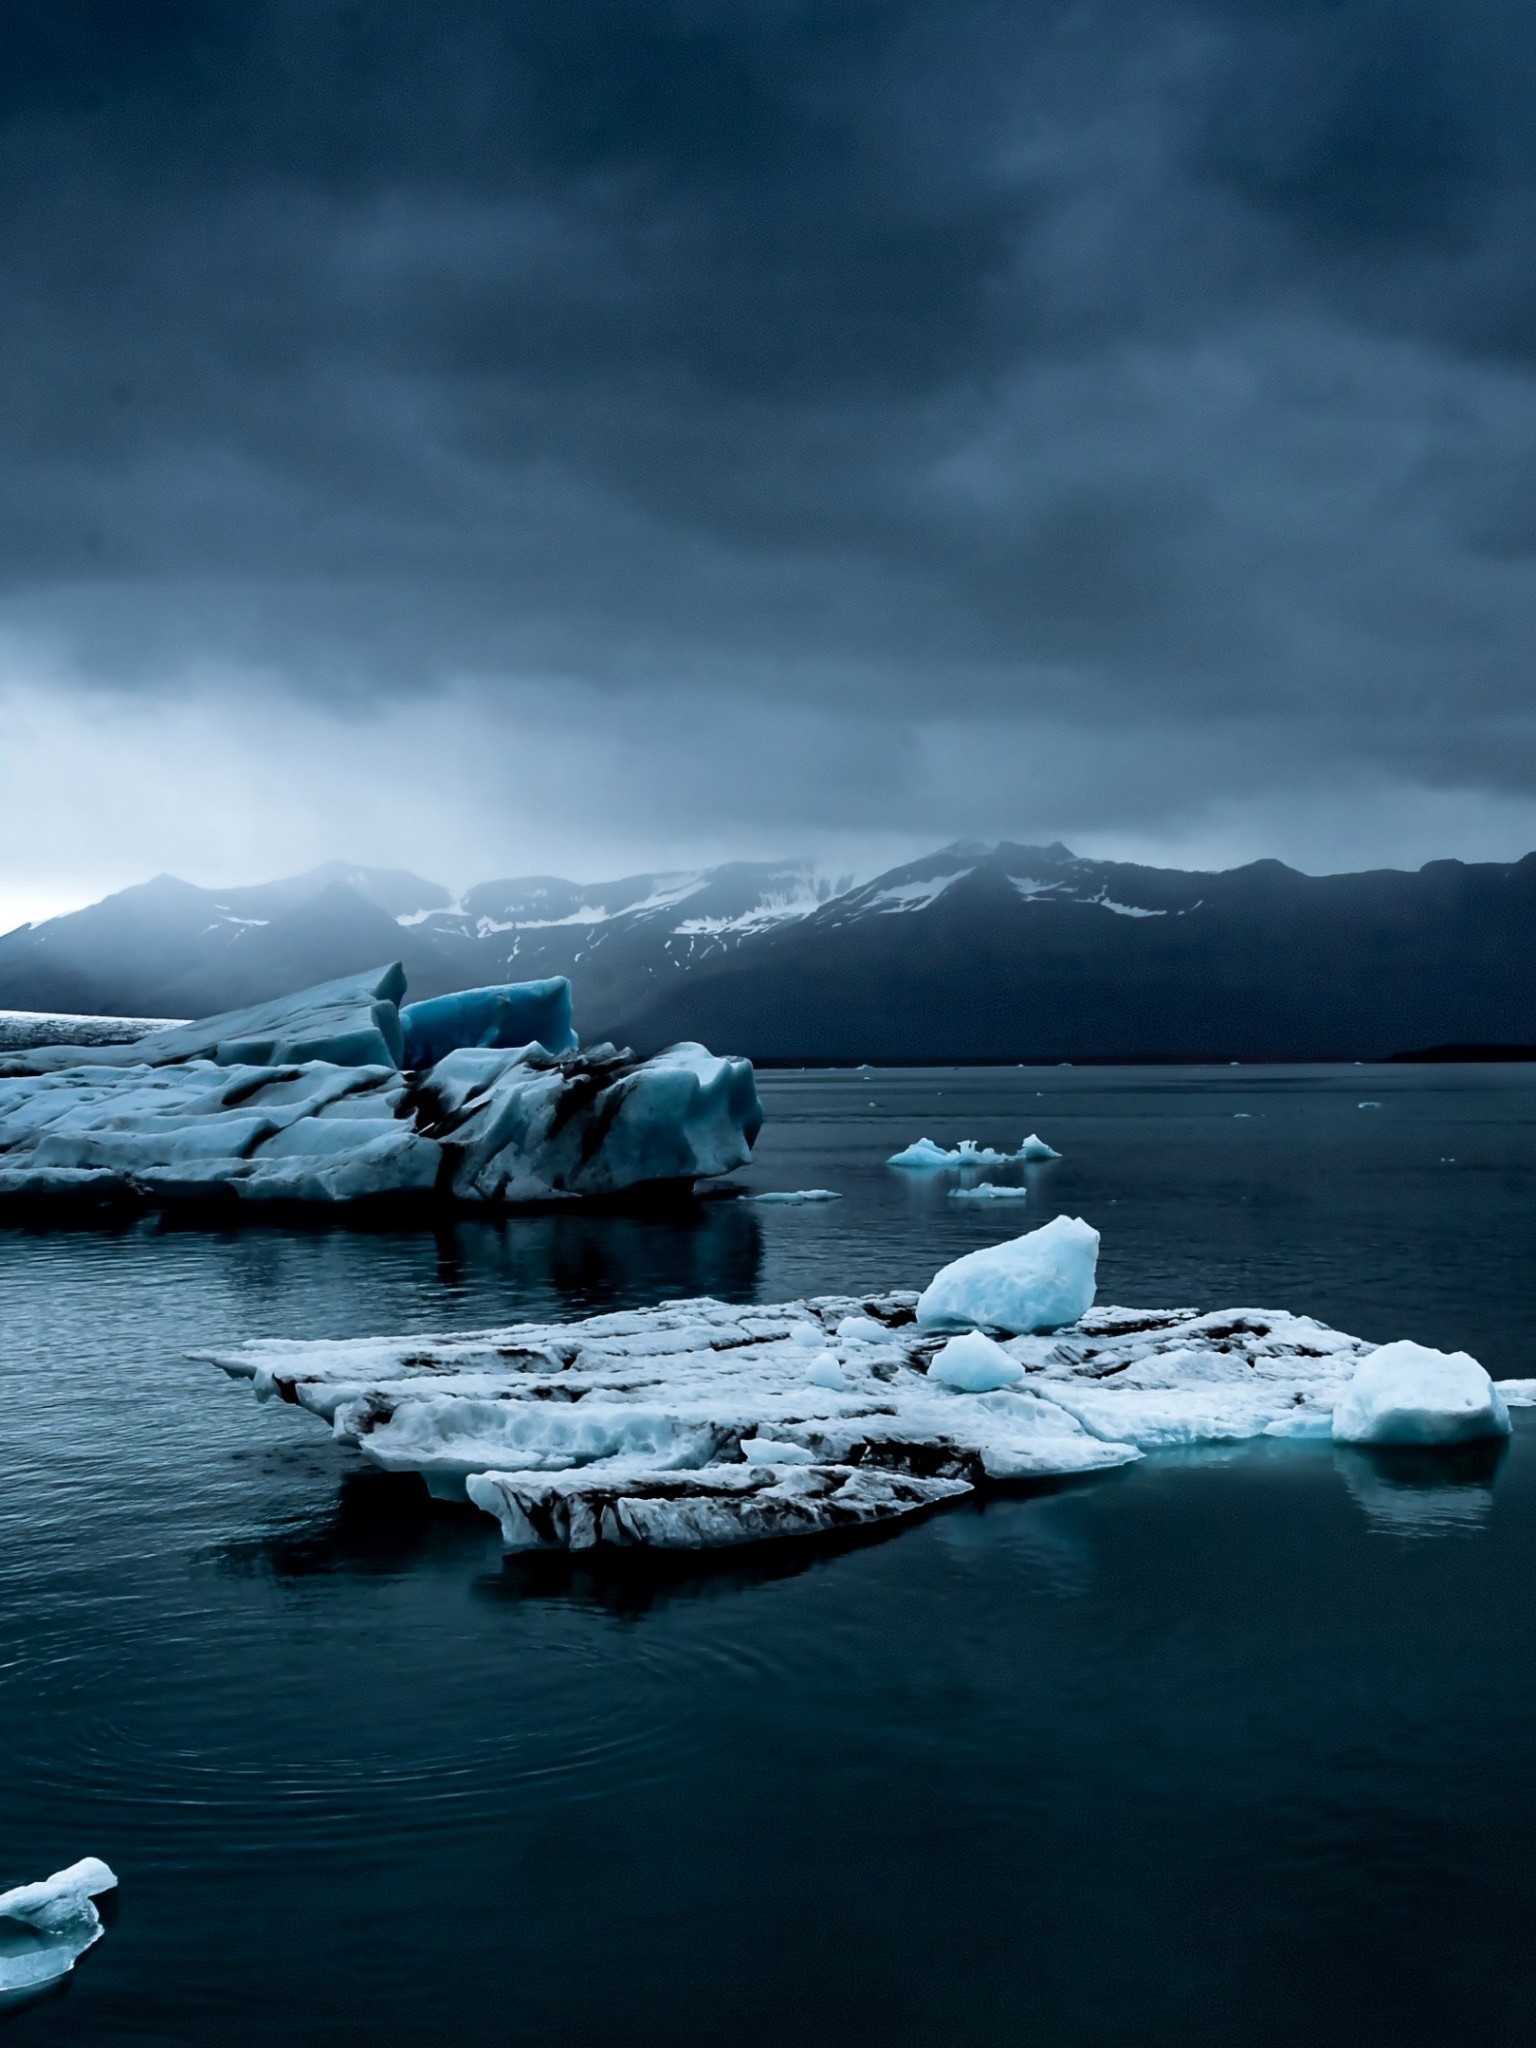 Iceland, Iceberg, Dark Clouds - Far Away From Home Quote - HD Wallpaper 